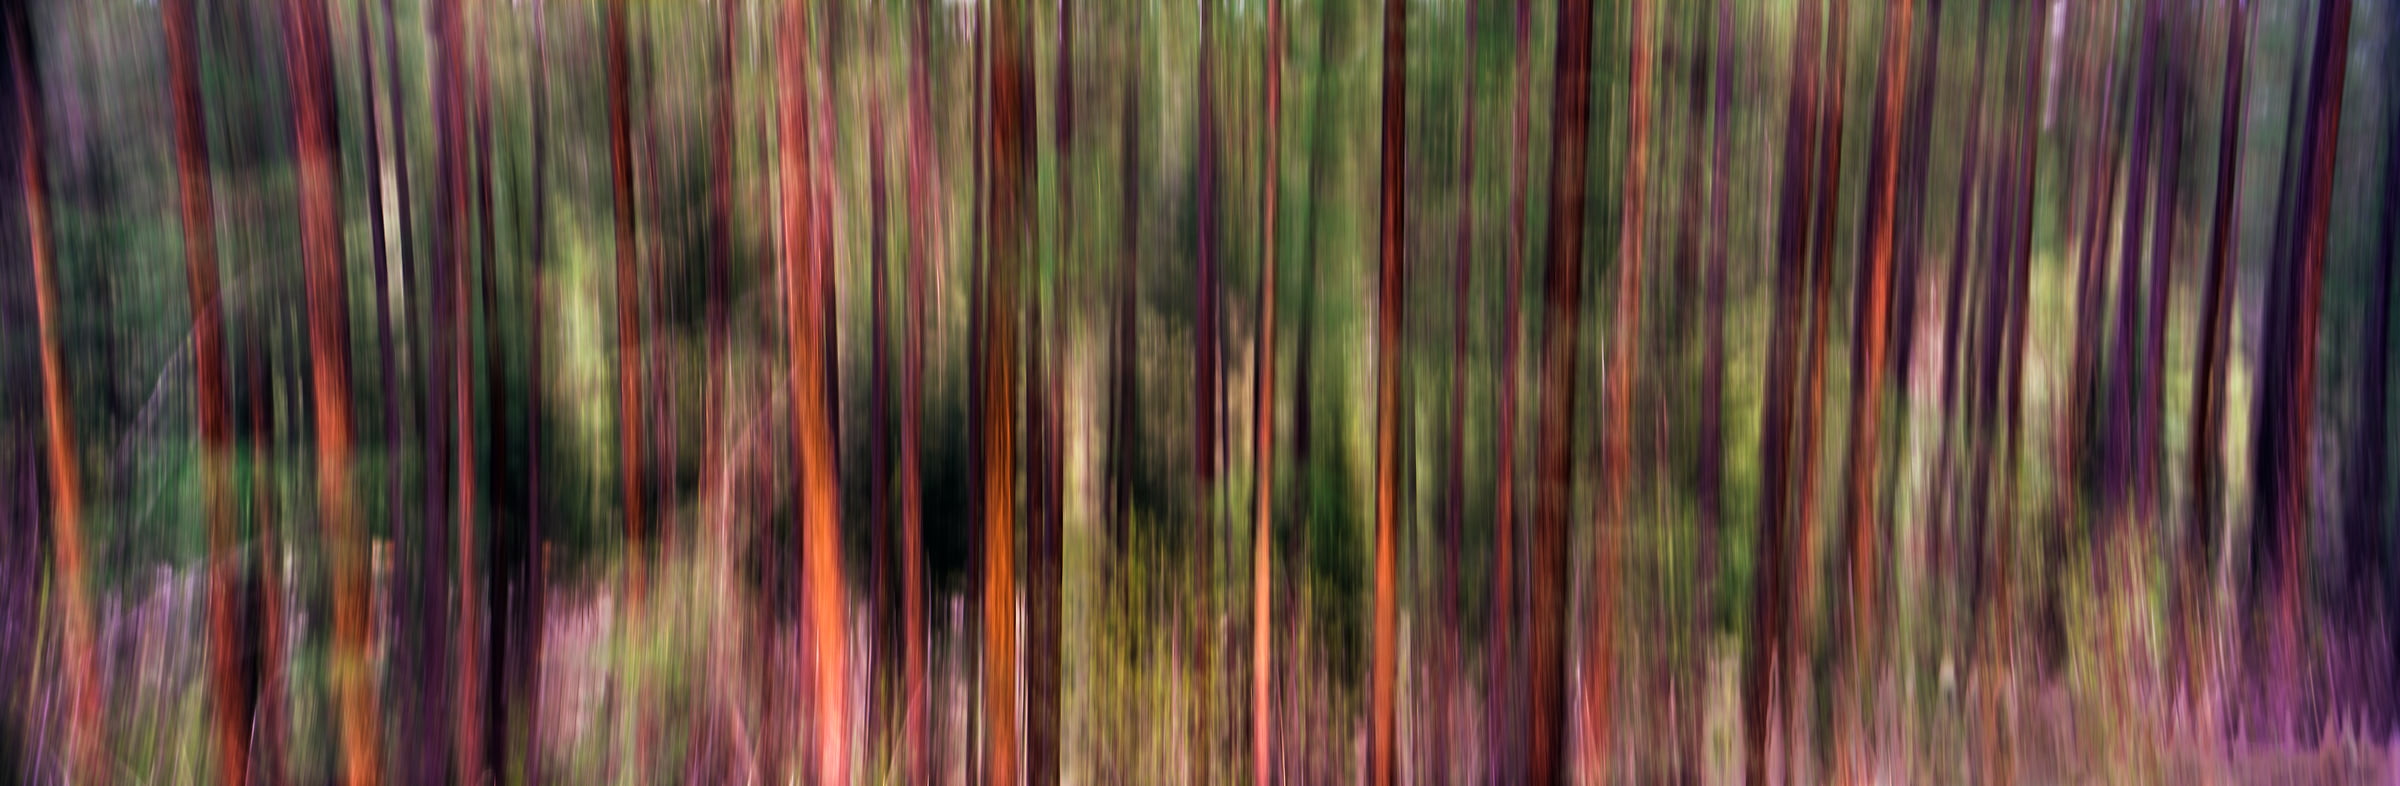 327 megapixels! A very high resolution, large-format, fine art photograph of a forest; abstract photograph created by Scott Dimond in Kimberley, British Columbia, Canada